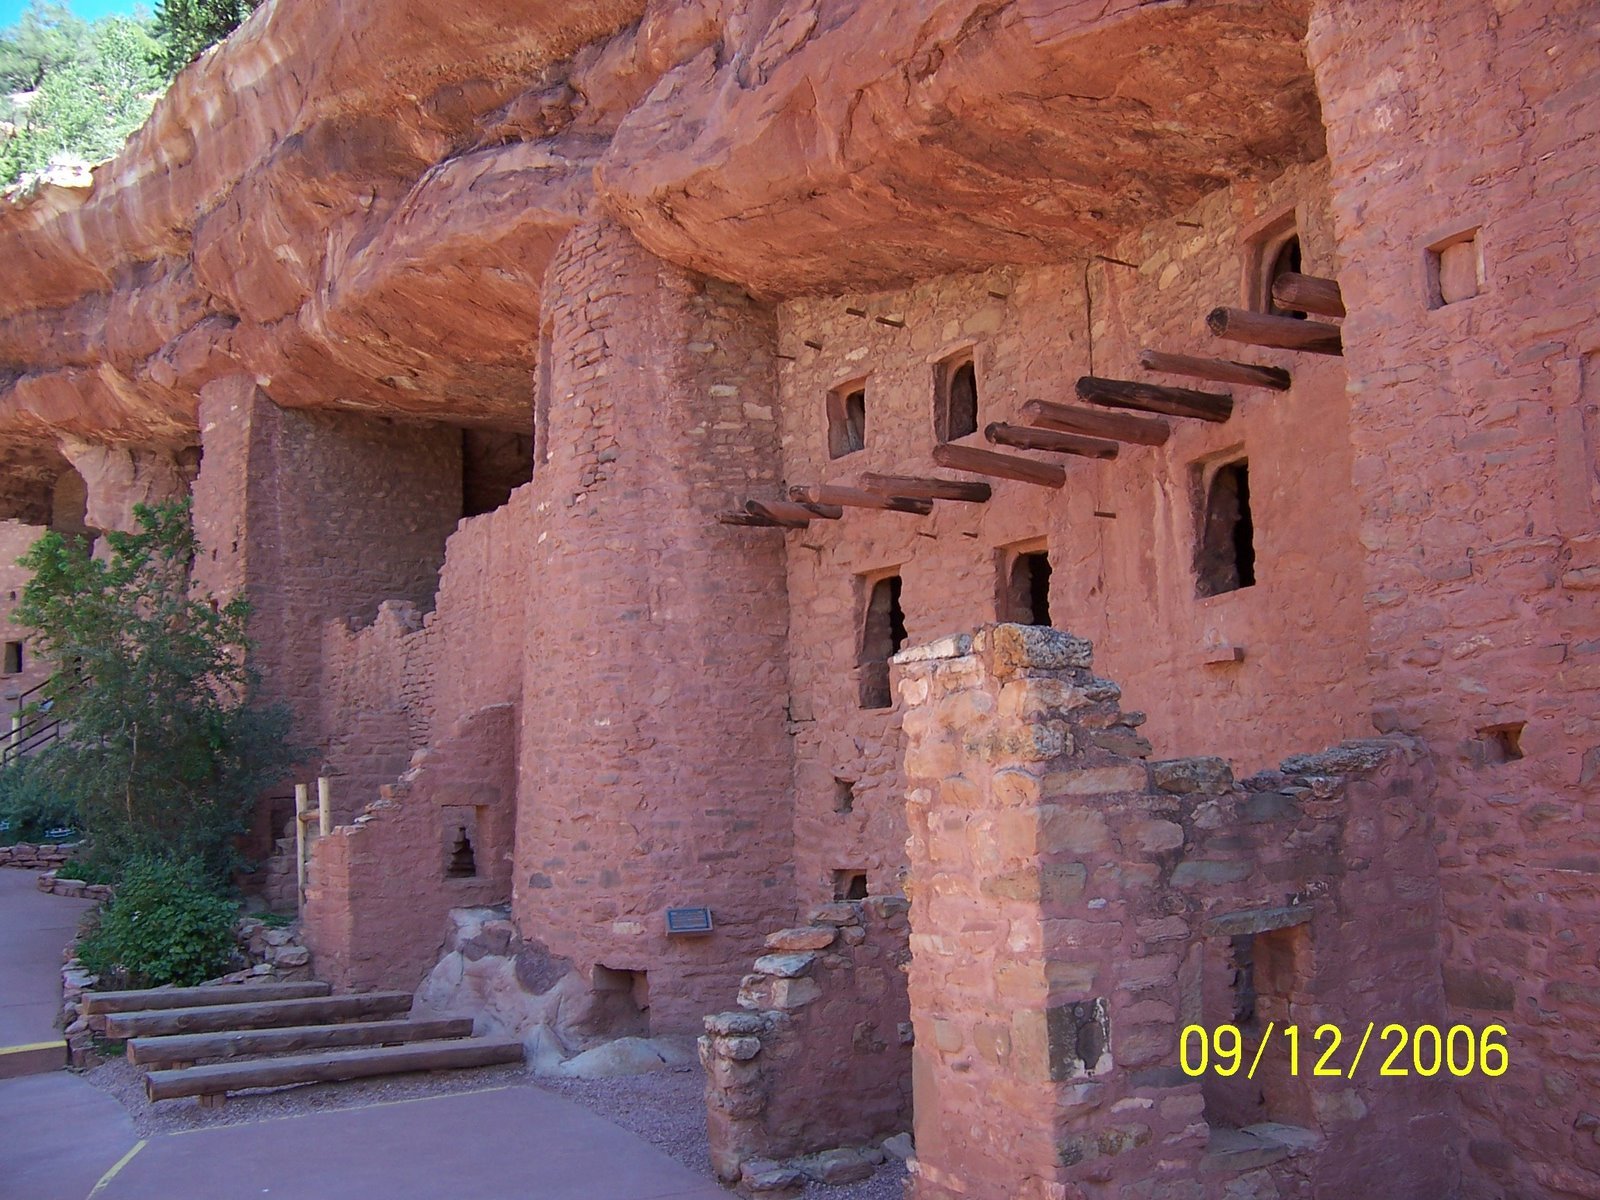 Image 643513 for prototype 4266 in ImageNet from class cliff dwelling